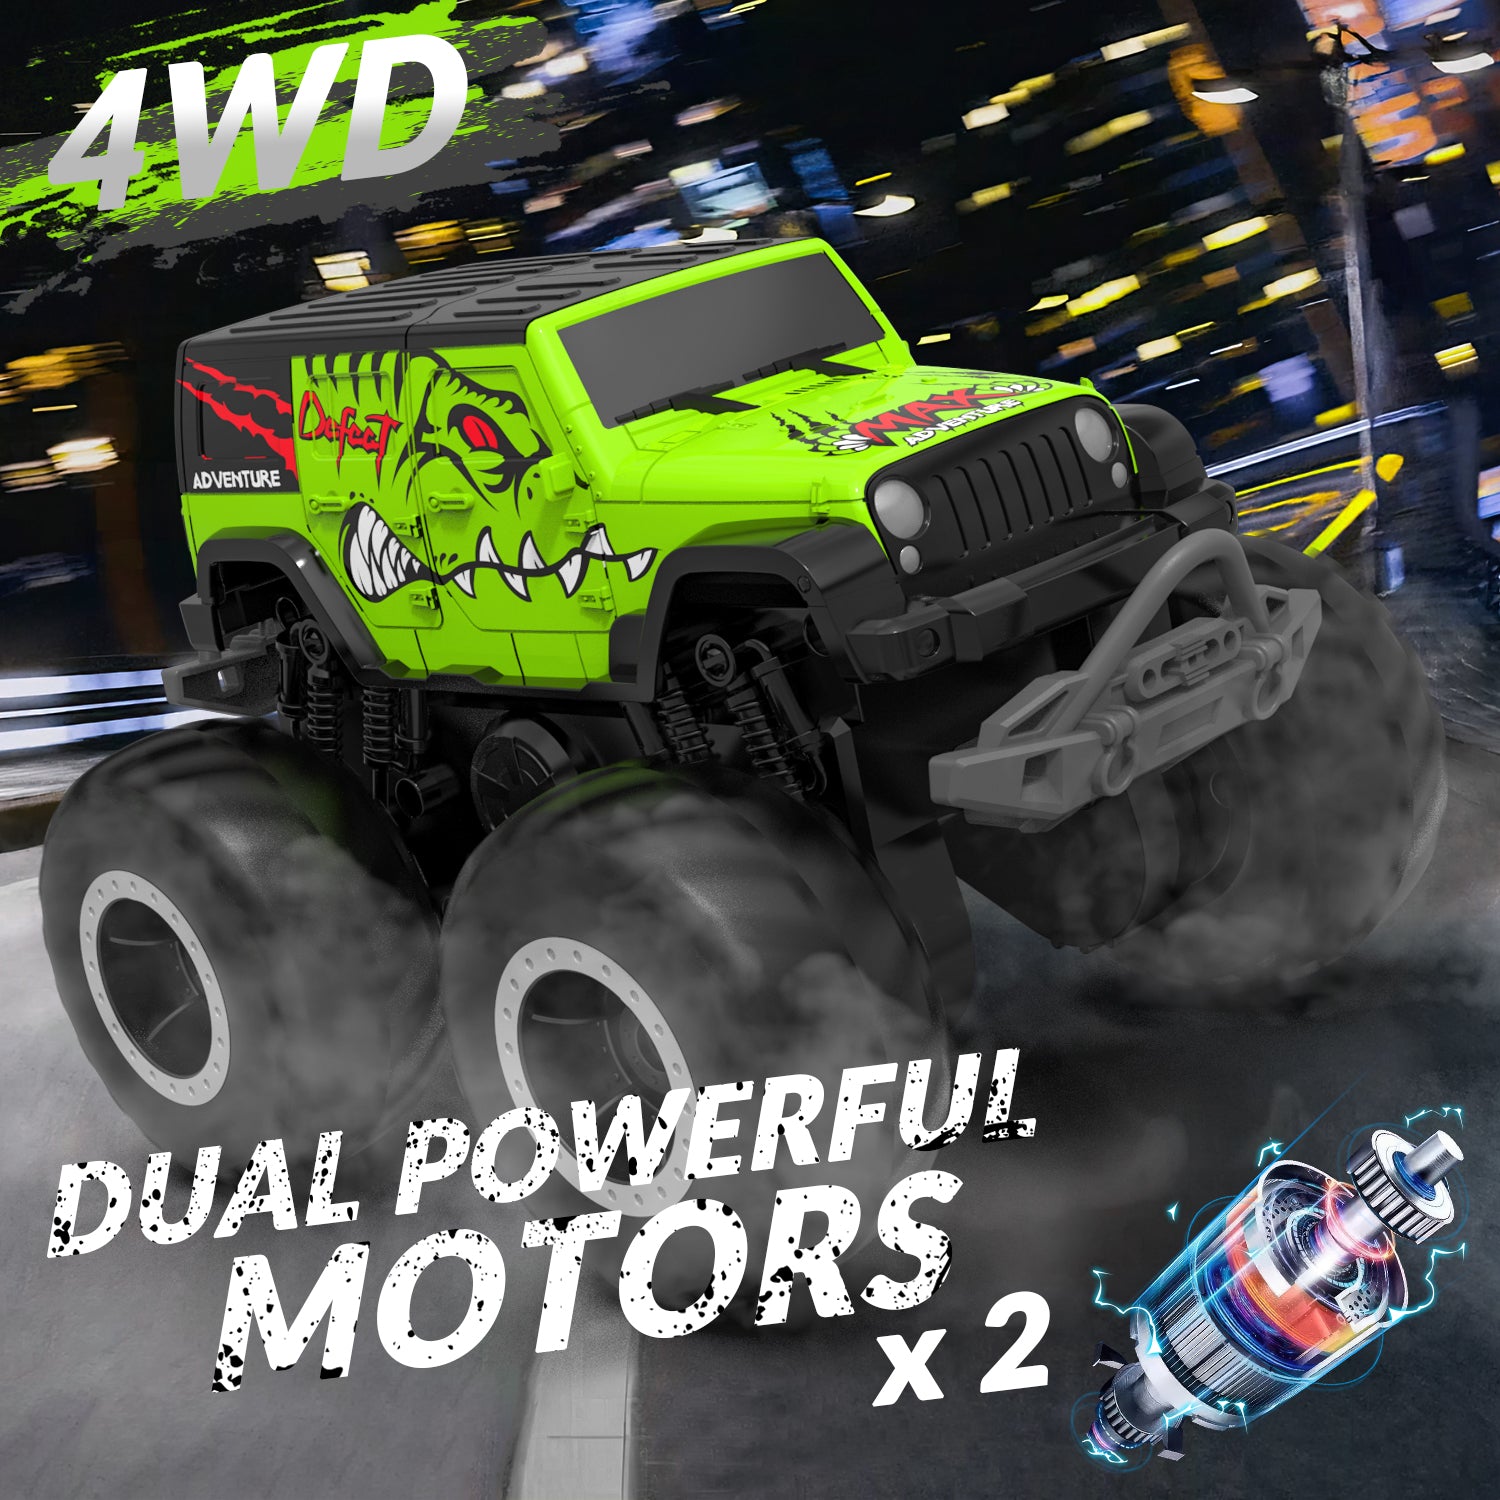 STEMTRON Amphibious Remote Control Car 1:20 All Terrain Off-Road Waterproof RC Monster Truck(Green)